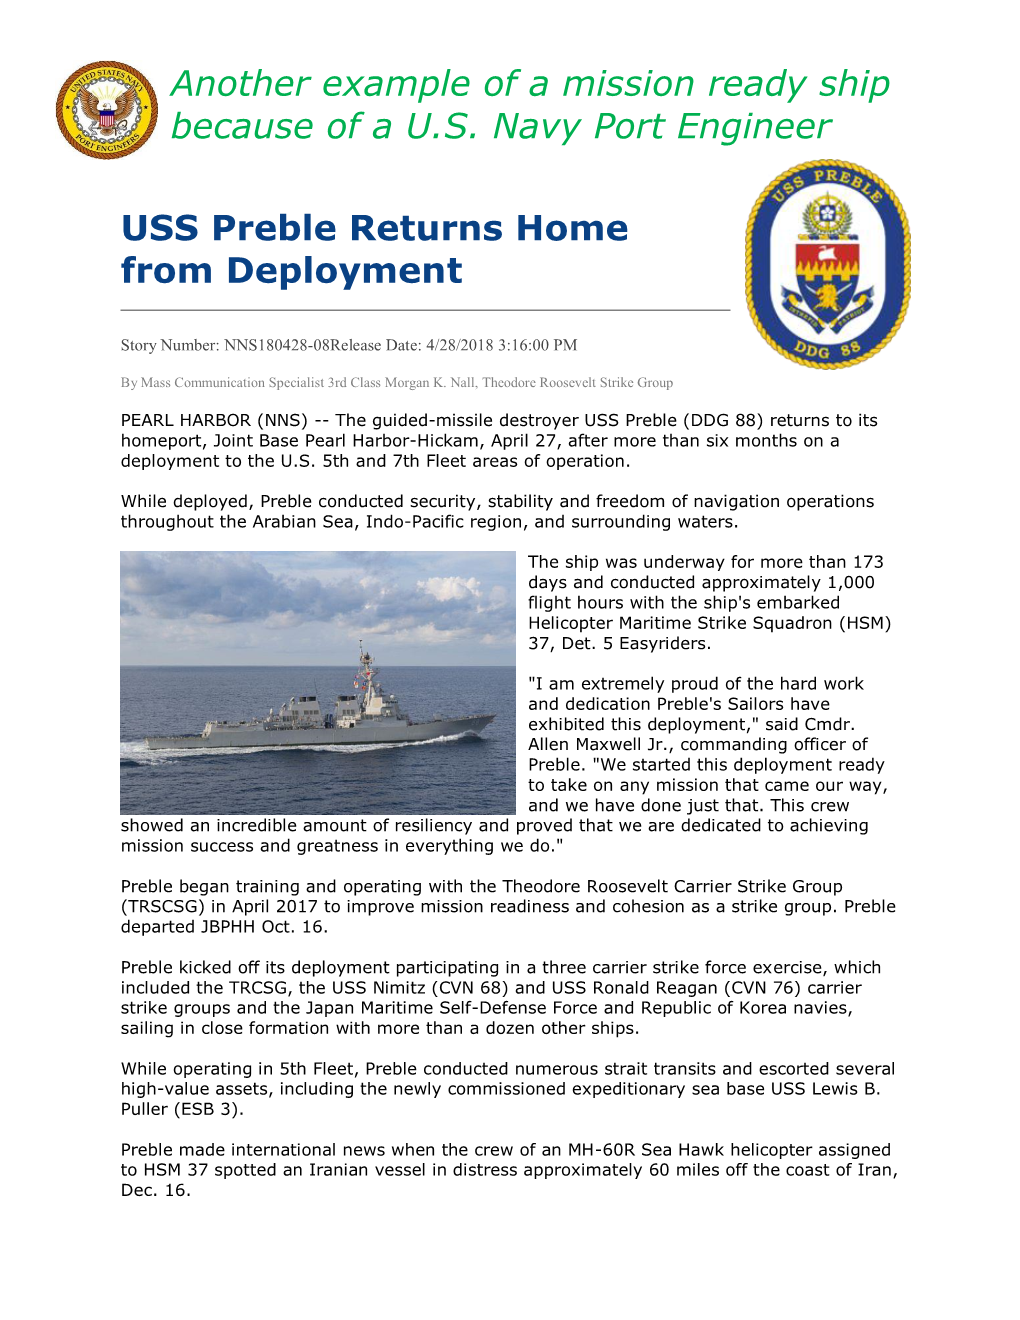 USS Preble Returns Home from Deployment